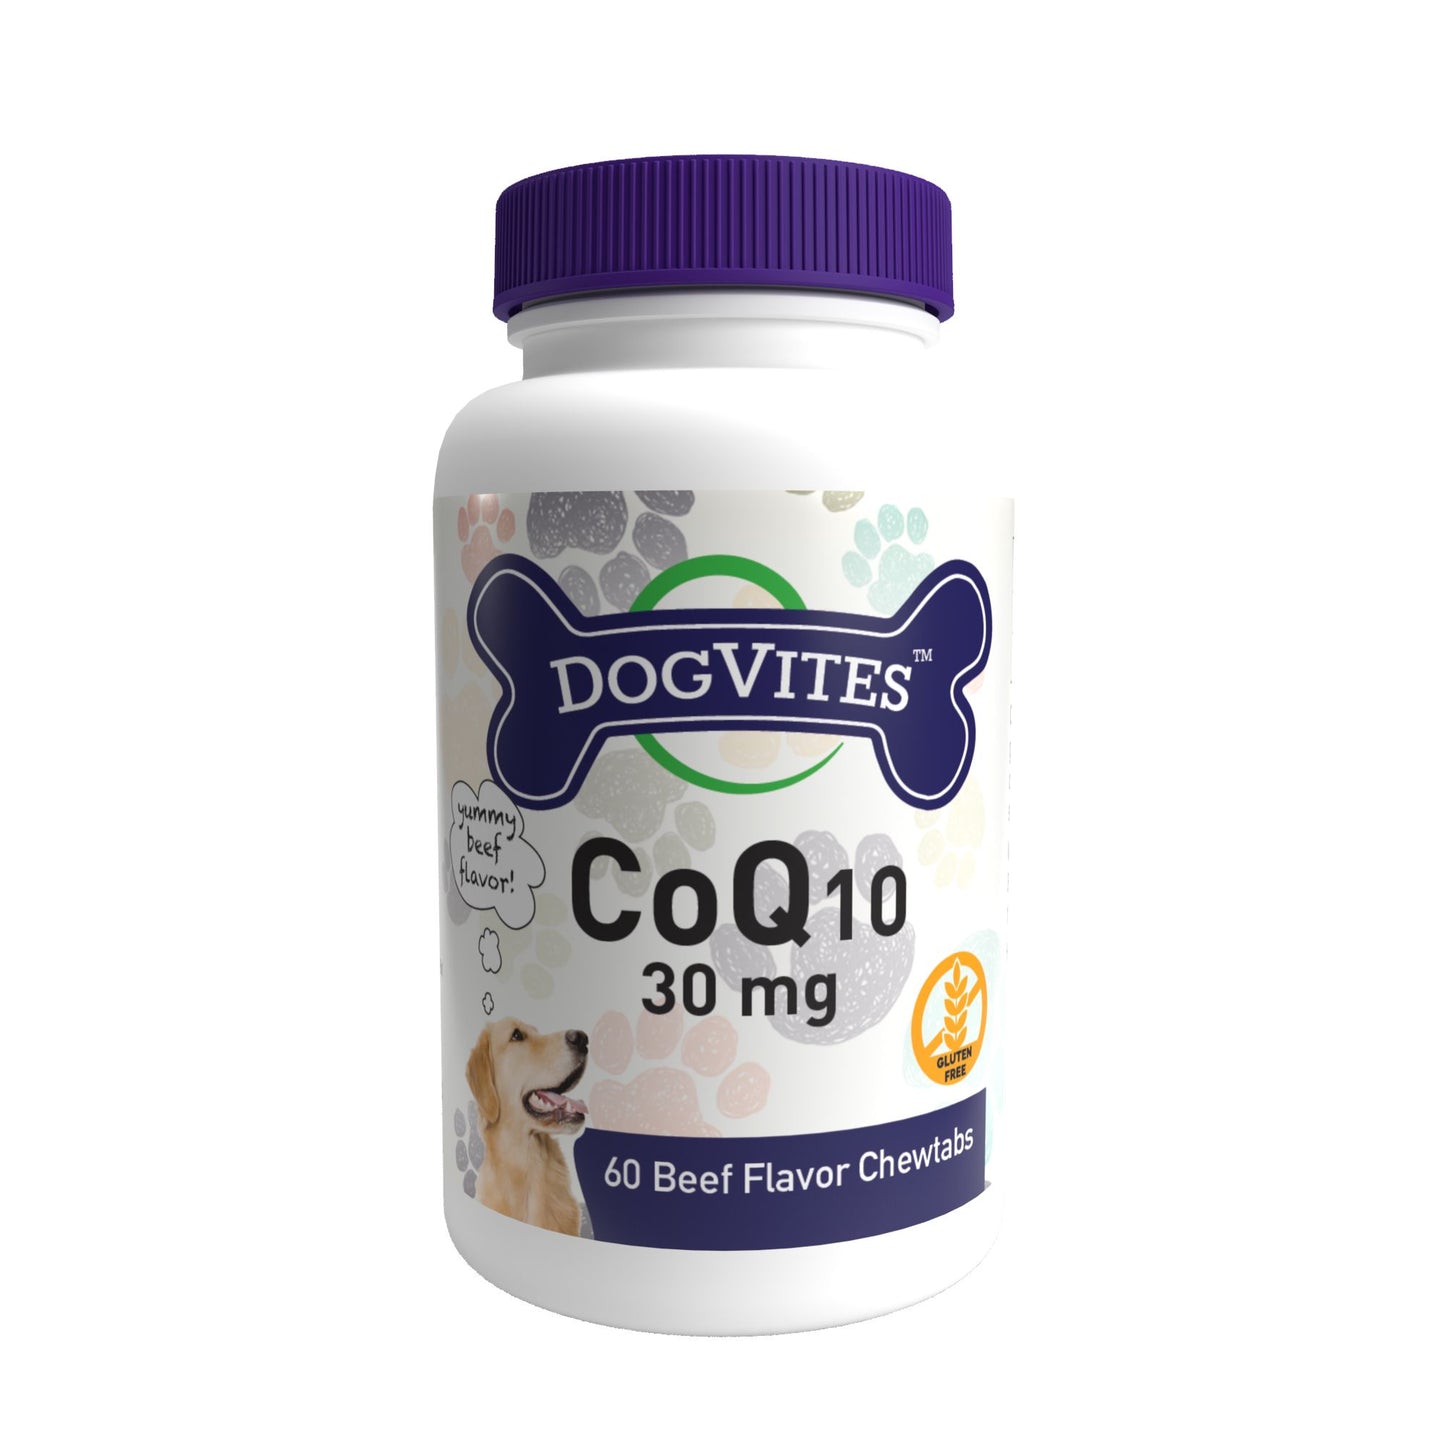 Health Thru Nutrition Dog-Vites CoQ10 for Dogs 30mg 60 Chewable Tablets Beef Flavor